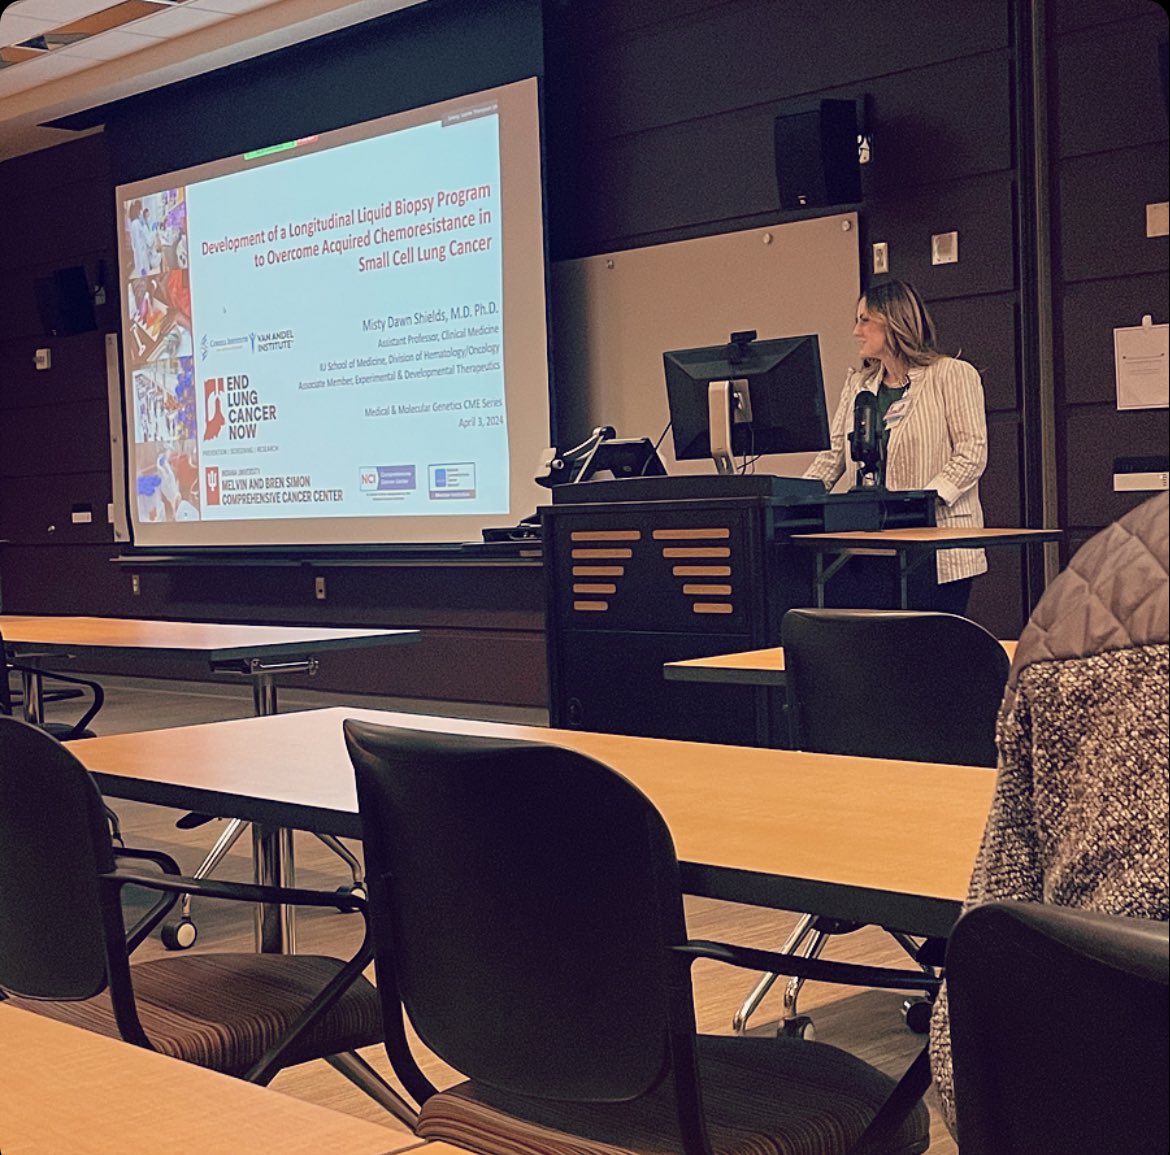 Thank you to the @iugradschool #medicalmoleculargenetics program for the invitation to speak at the seminar series on @TheShieldsLab research, “Development of a longitudinal liquid biopsy program in small cell lung cancer” #MACROS #liquidbiopsy #ngs #SCLC #LCSM @IUCancerCenter